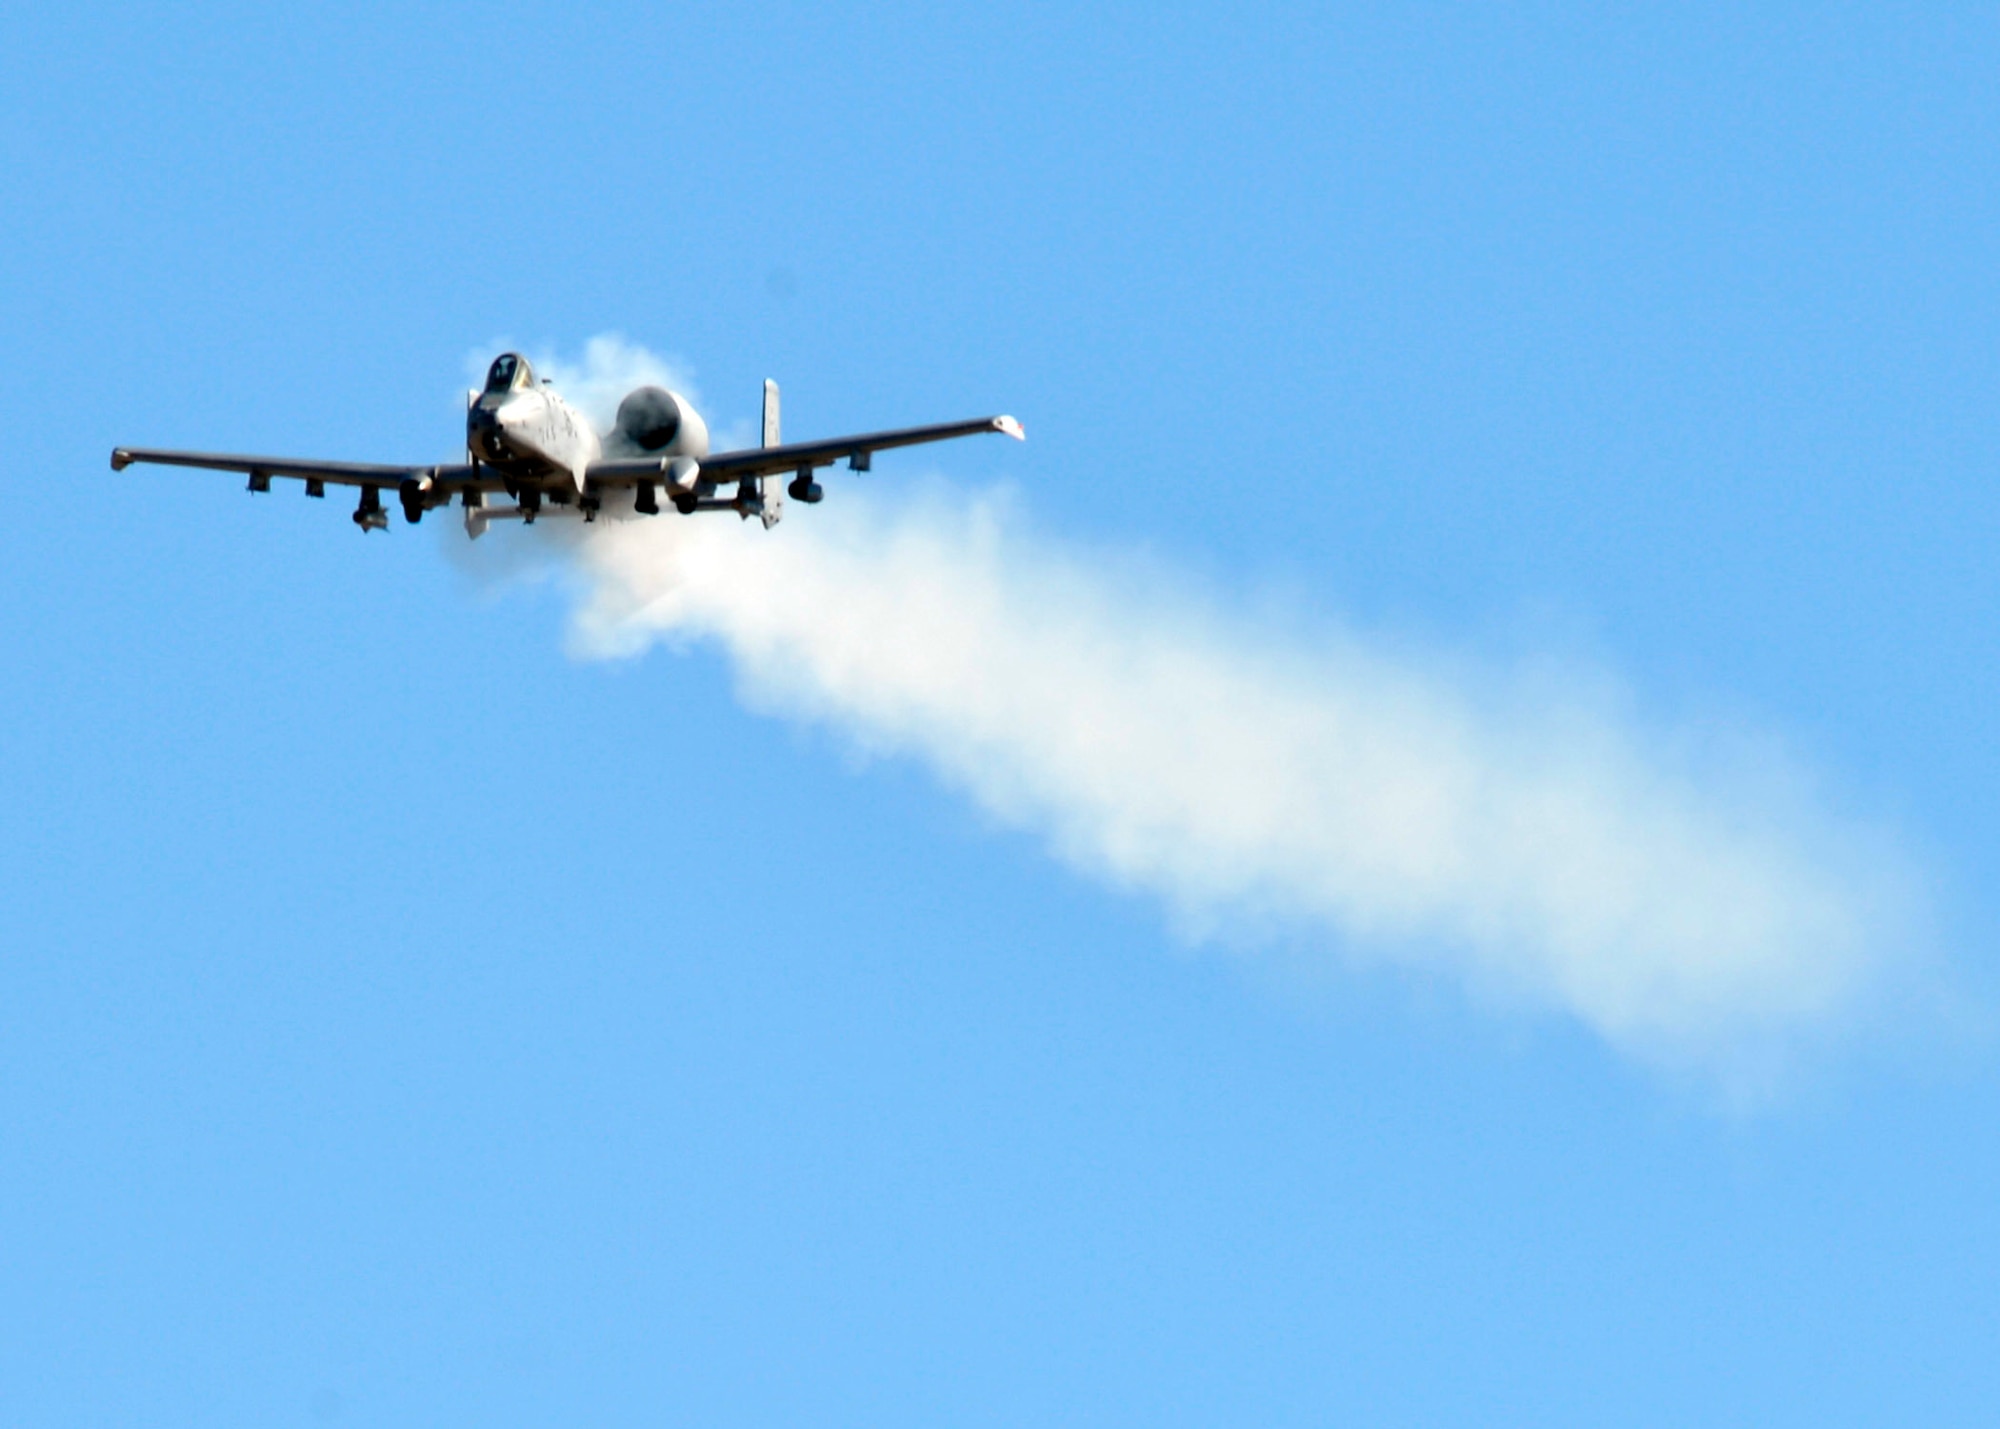 An A-10 Thunderbolt II from Davis Monthan Air Force Base fires off its 30mm gun during a training mission at the Barry Goldwater Range, Gila Bend Air Force Auxiliary Field, Arizona, Nov. 20, 2014. The A-10 Thunderbolt is also known as the Warthog, the "flying gun" and the Tankbuster. The aircraft was used extensively during Operation Desert Storm, in support of Nato operations in response to the Kosovo crisis, in Operation Enduring Freedom in Afghanistan and in Operation Iraqi Freedom. (U.S. Air Force photo by Senior Airman Devante Williams)